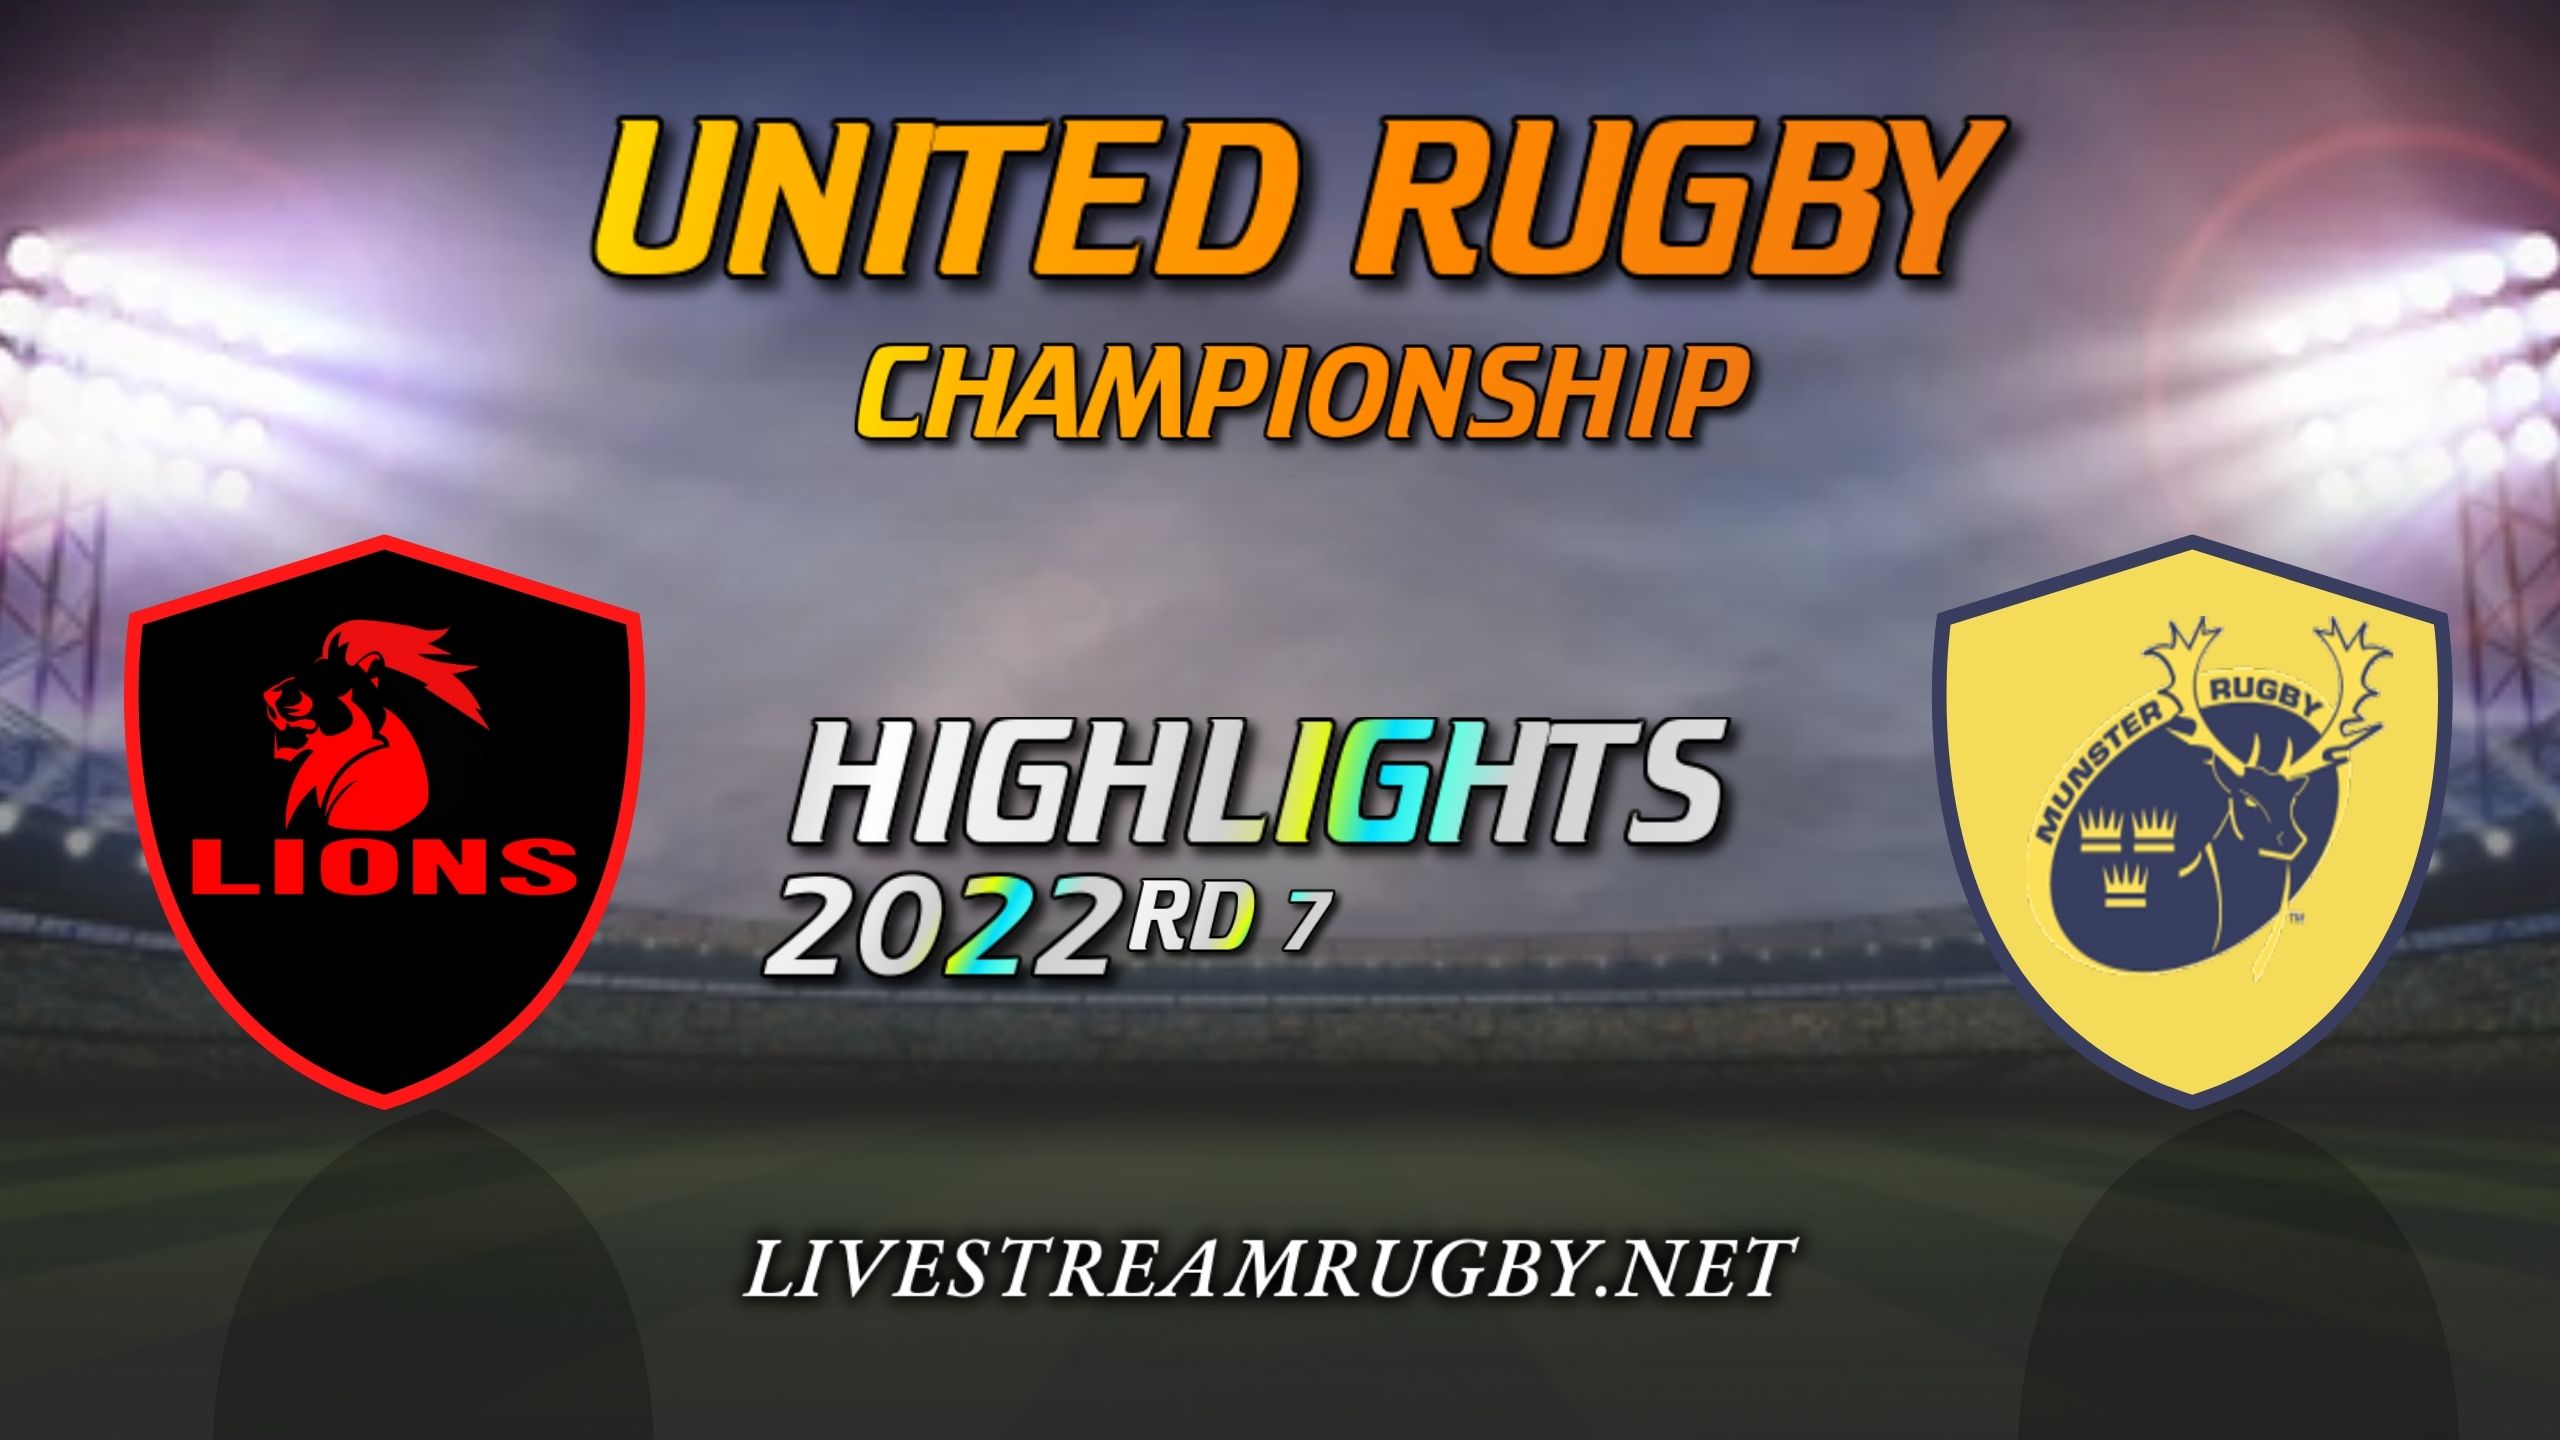 Lions Vs Munster Highlights 2022 Rd 7 United Rugby